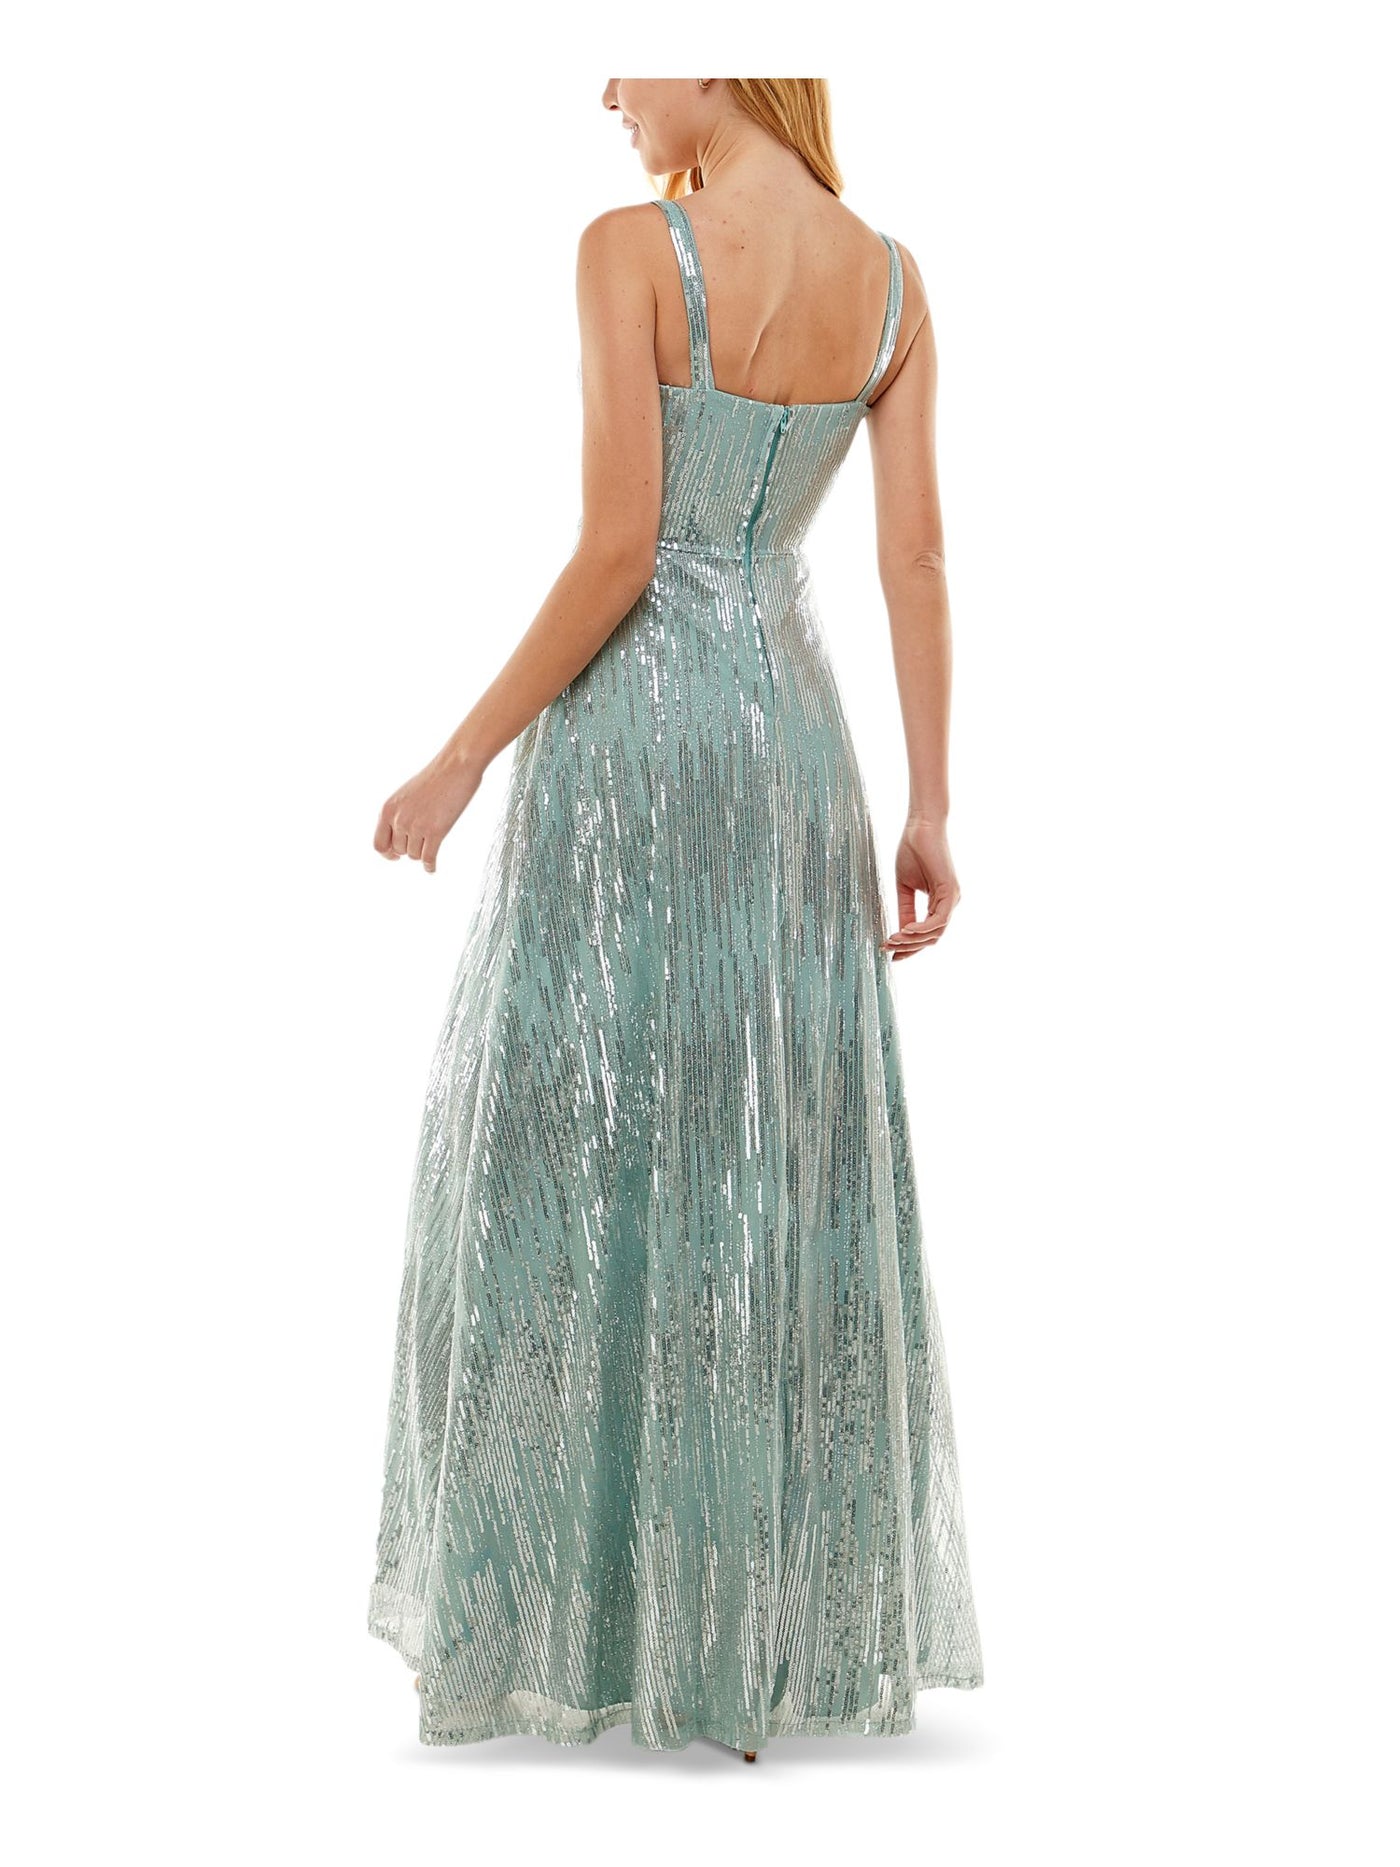 SAY YES TO THE PROM Womens Green Sequined Zippered Lined Sleeveless Square Neck Full-Length Formal Gown Dress Juniors 5